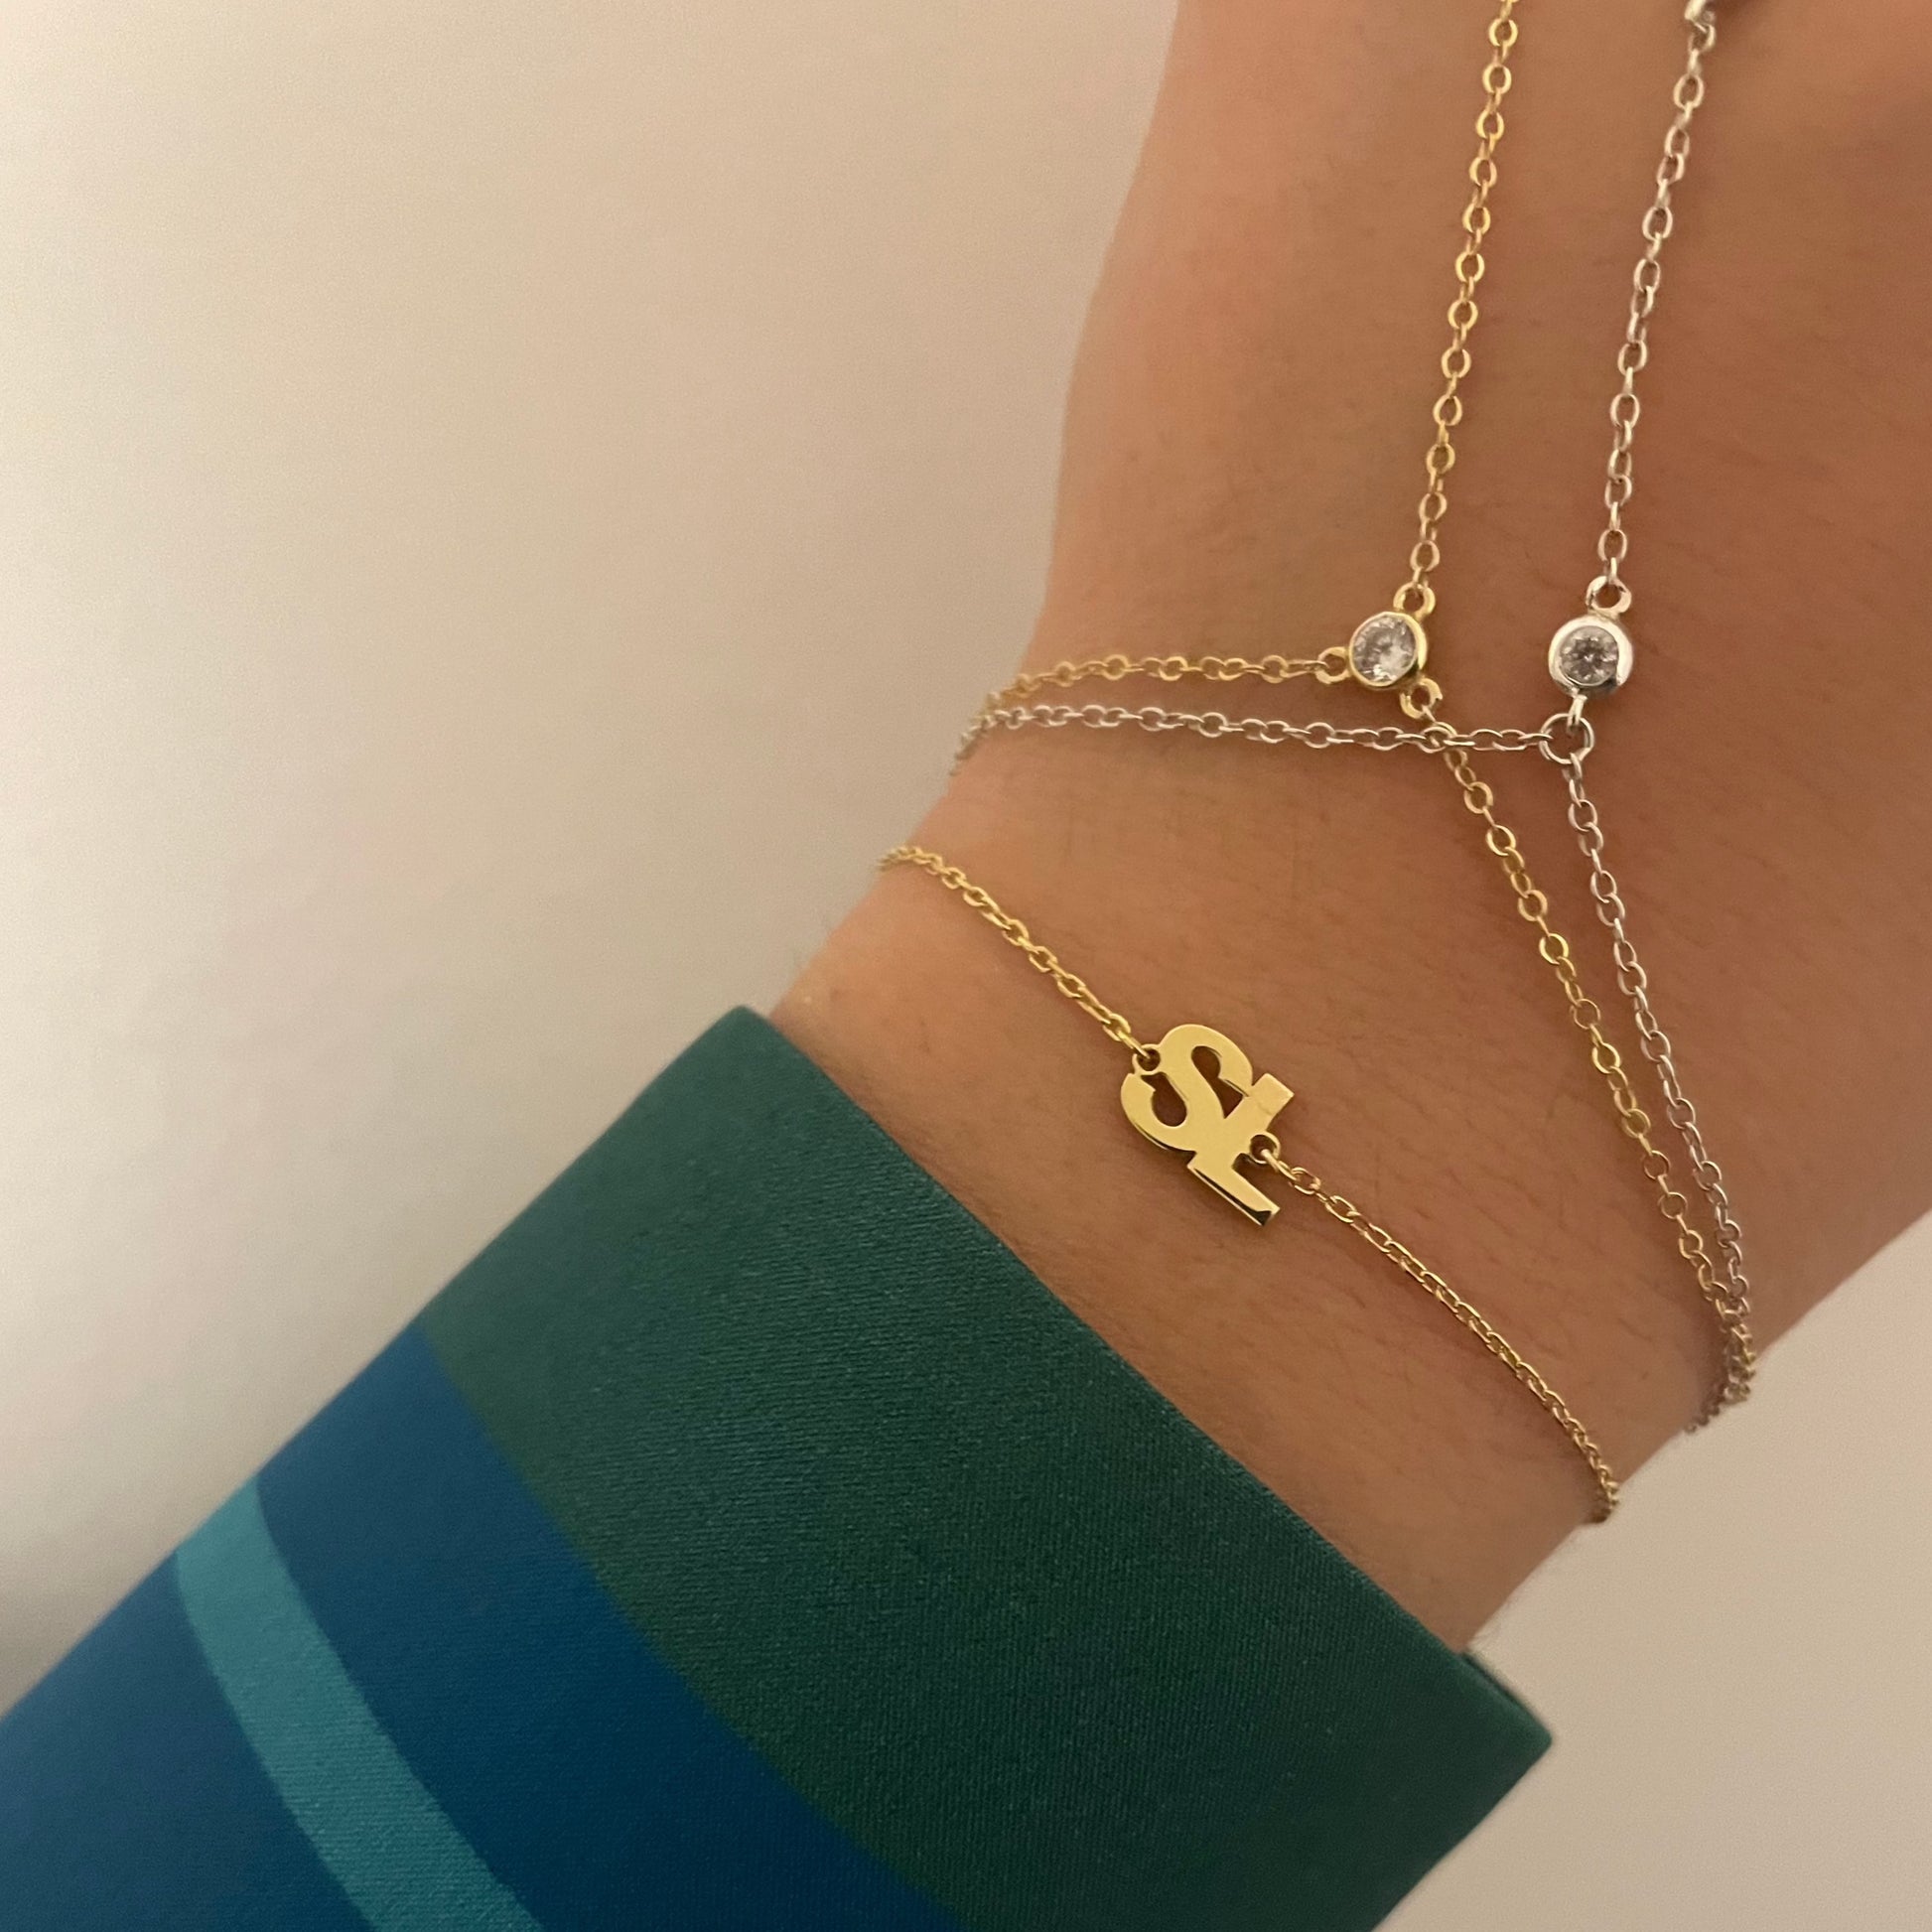 Double Initial Bracelet - Retail Therapy Jewelry